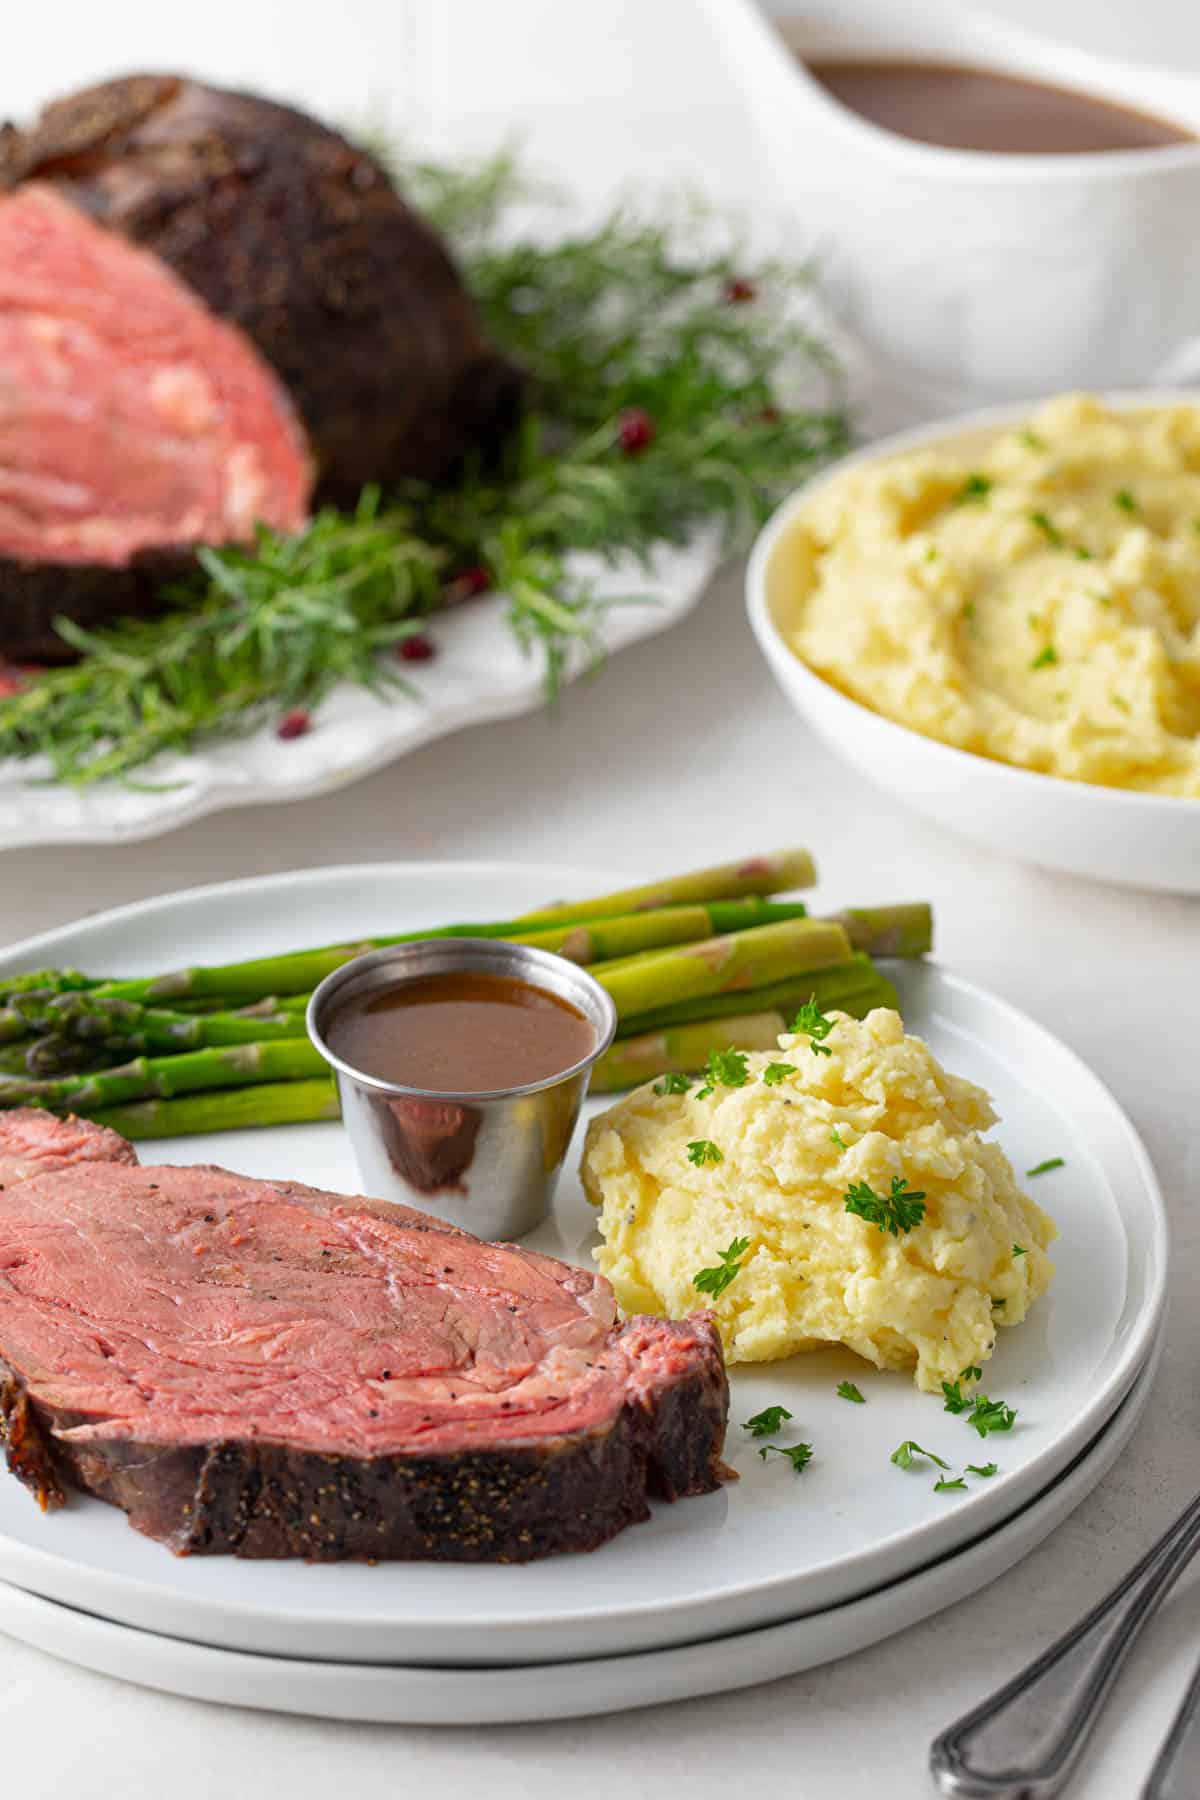 A plate with a slice of boneless prime rib with au jus, mashed potatoes and asparagus.